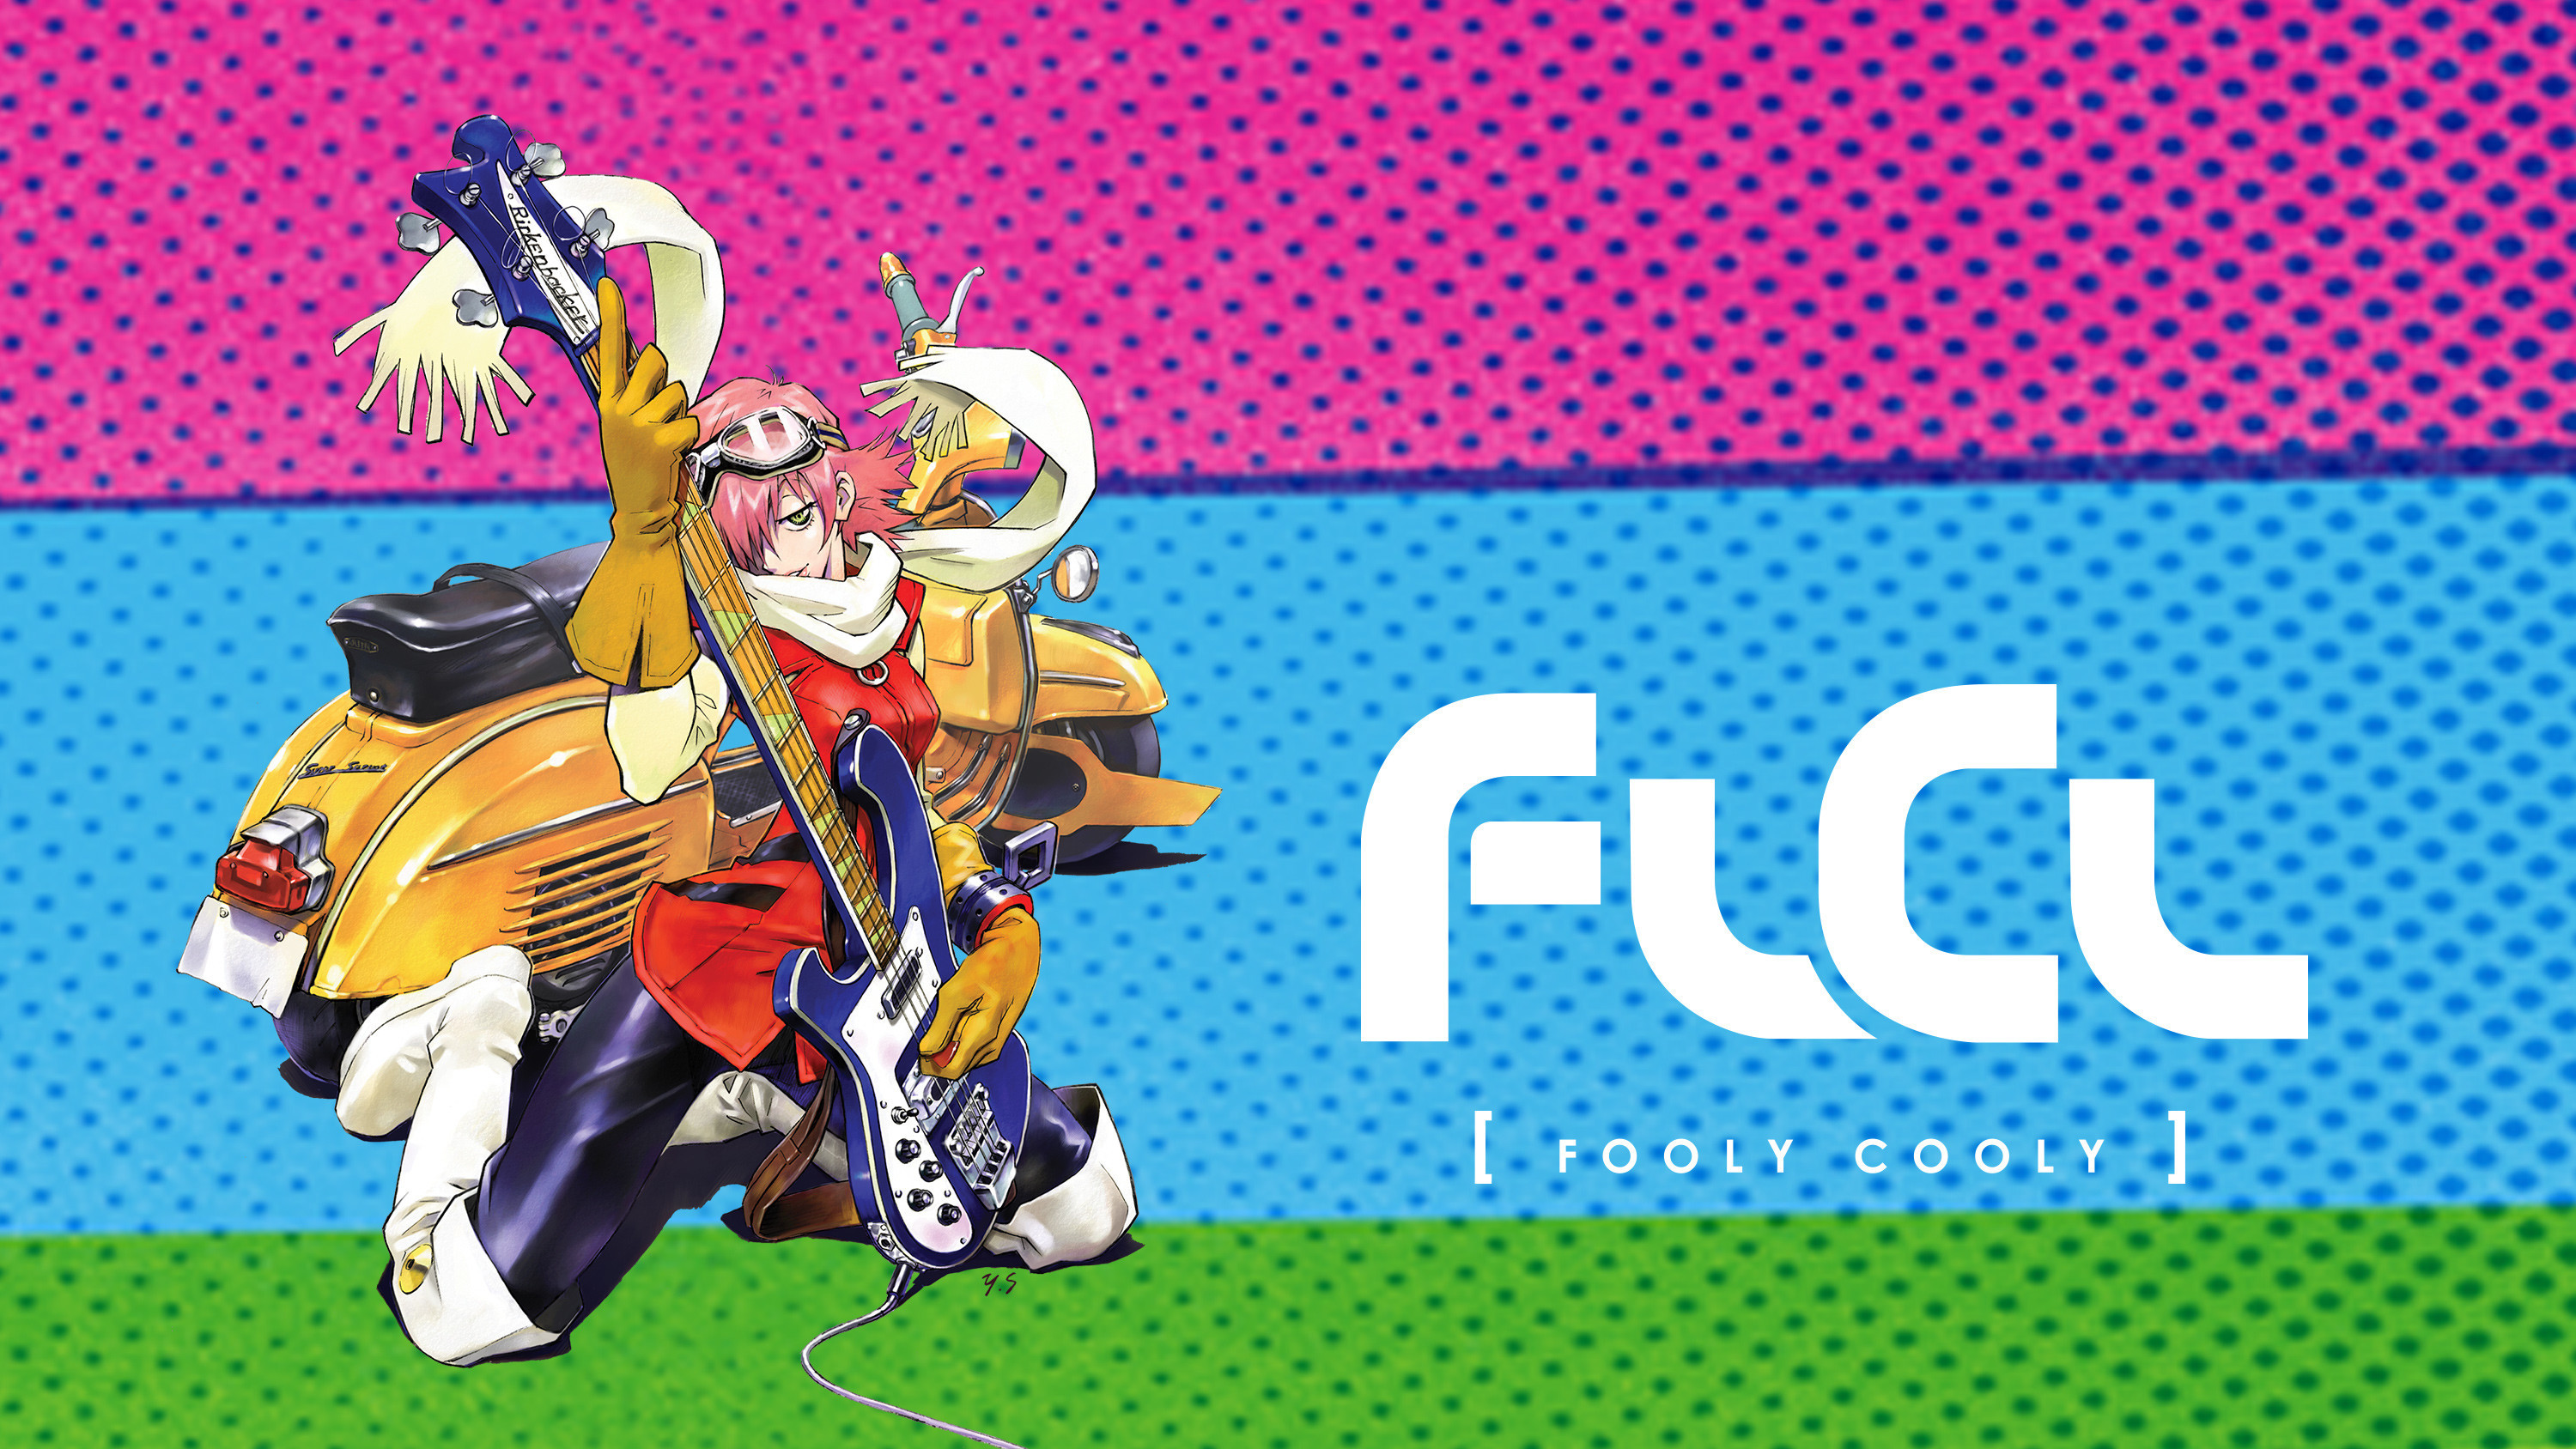 3000x1688, Flcl Wallpapers 58 
 Data Id 206719 
 Data - Fooly Cooly - HD Wallpaper 